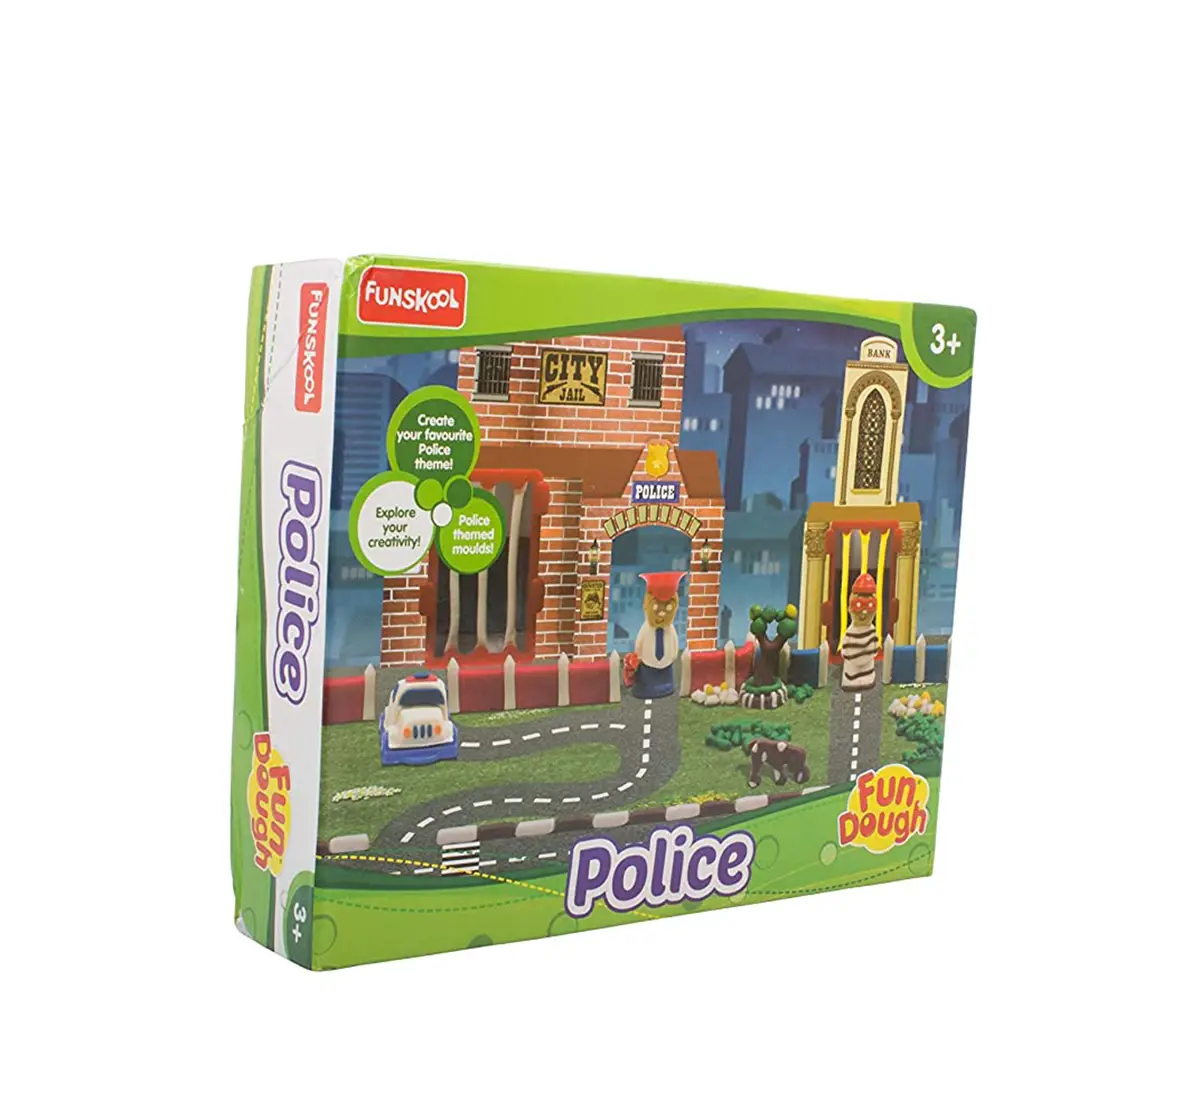 Fundough Police Dough Play Set for Kids age 3Y+